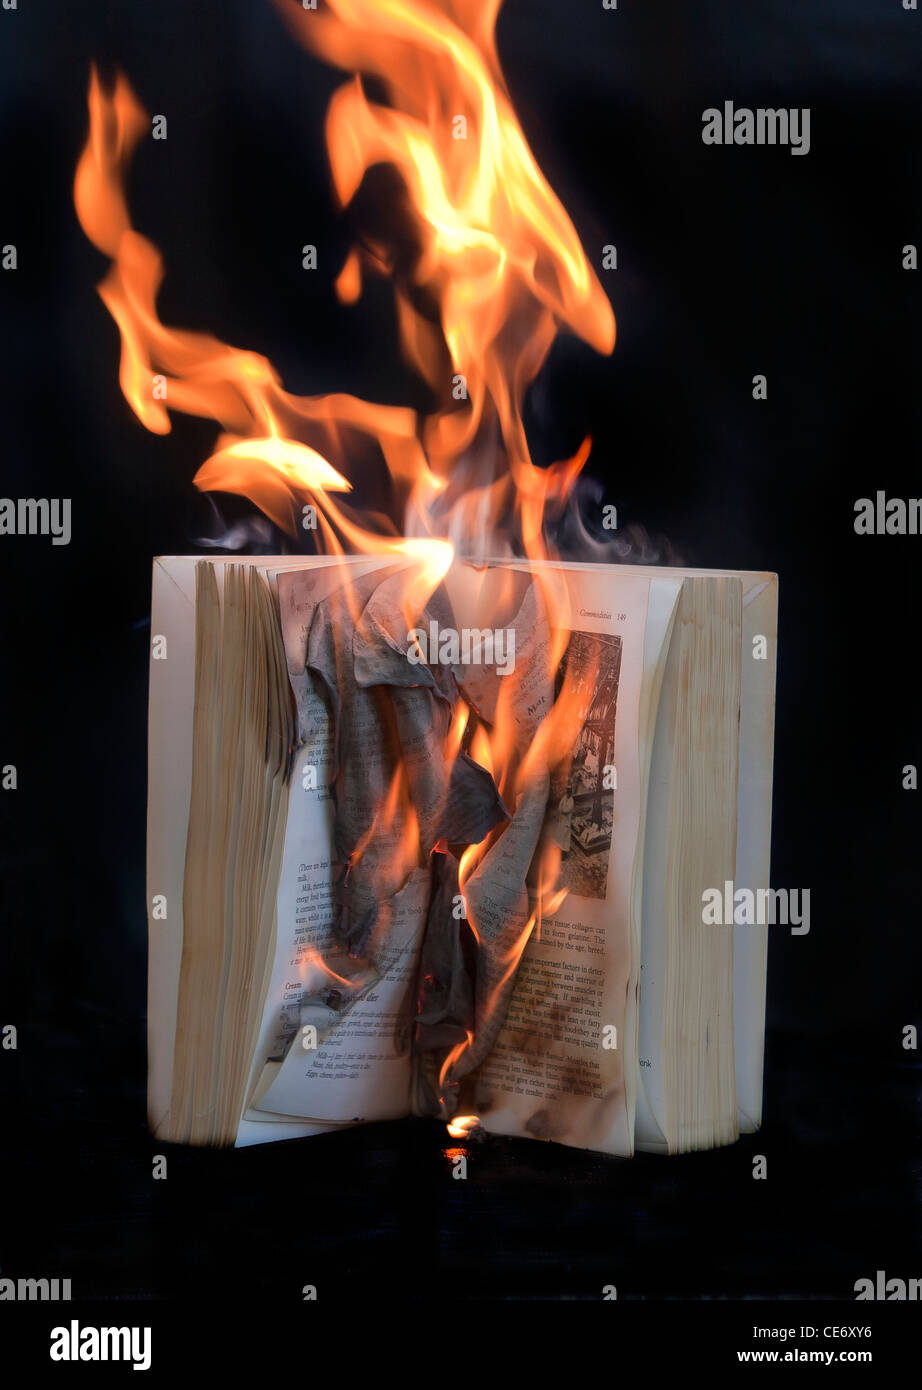 Book on fire